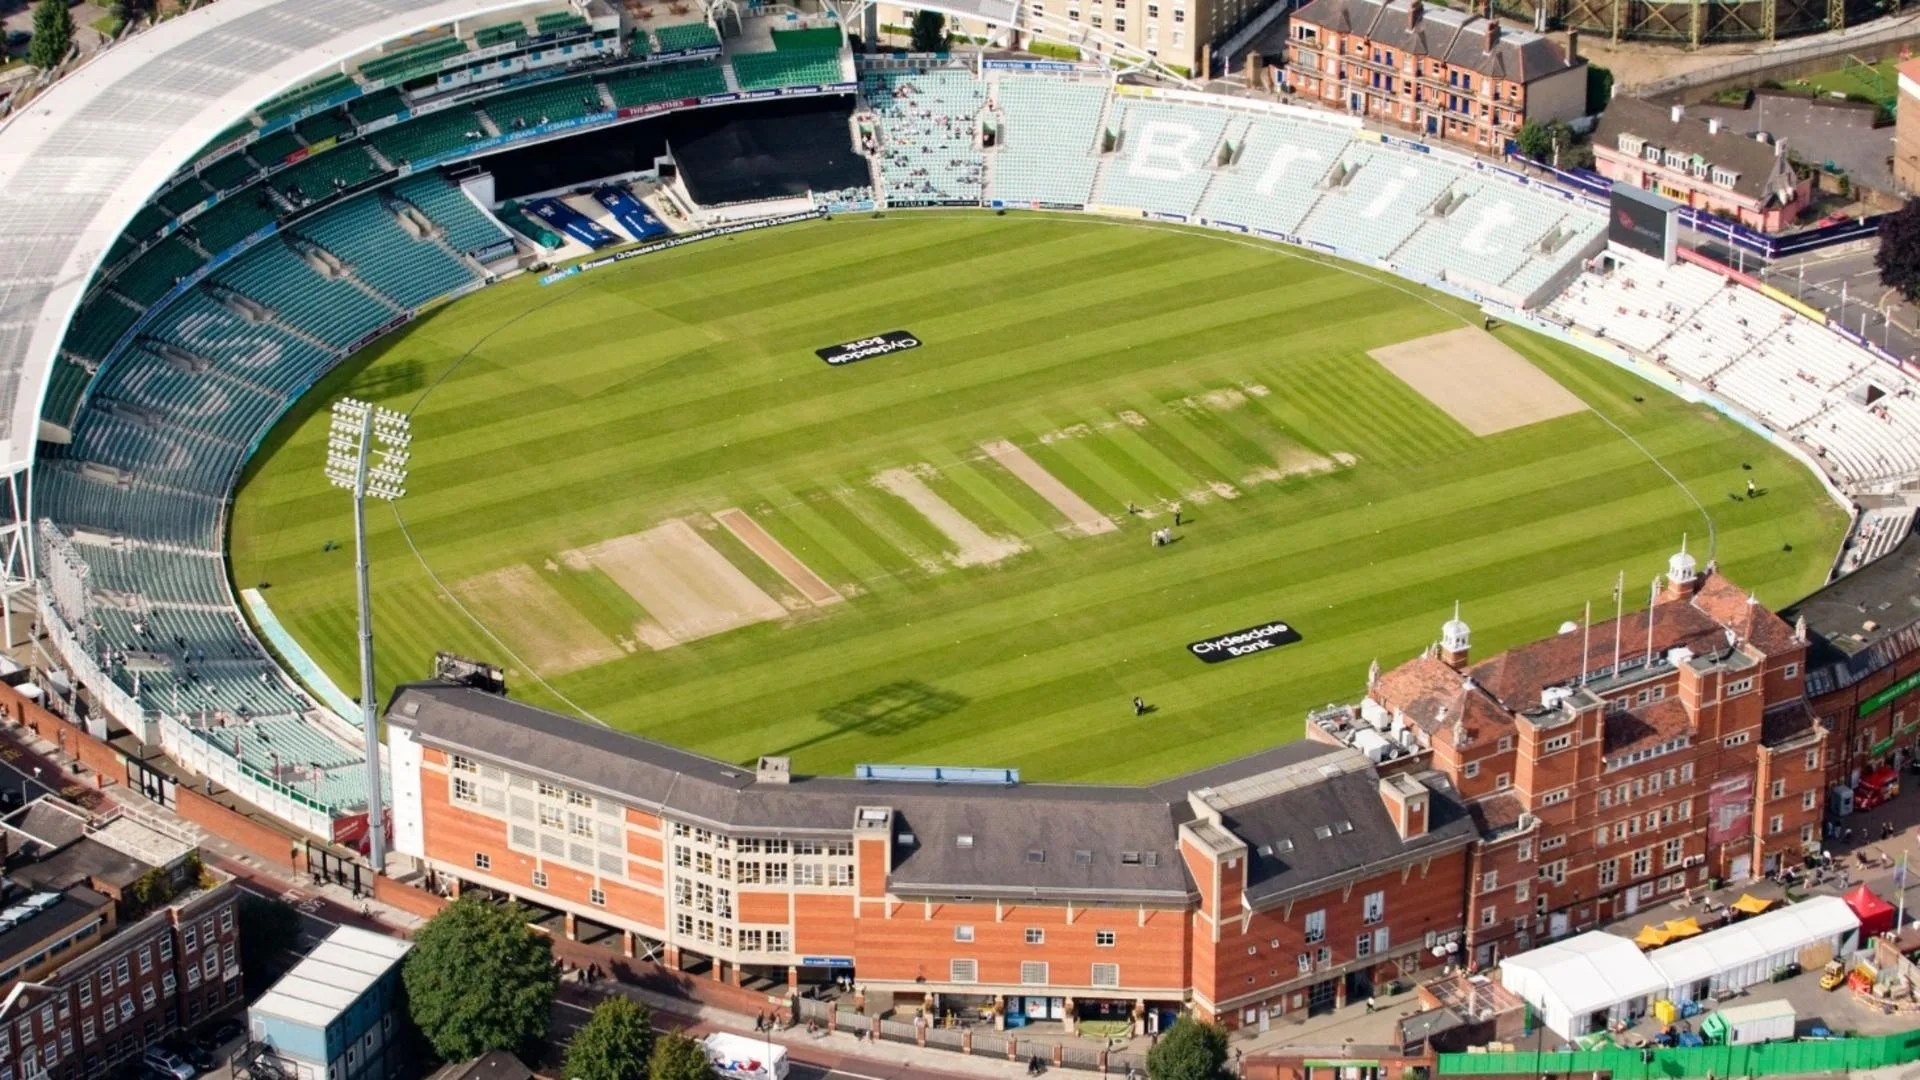 The Oval Pitch 